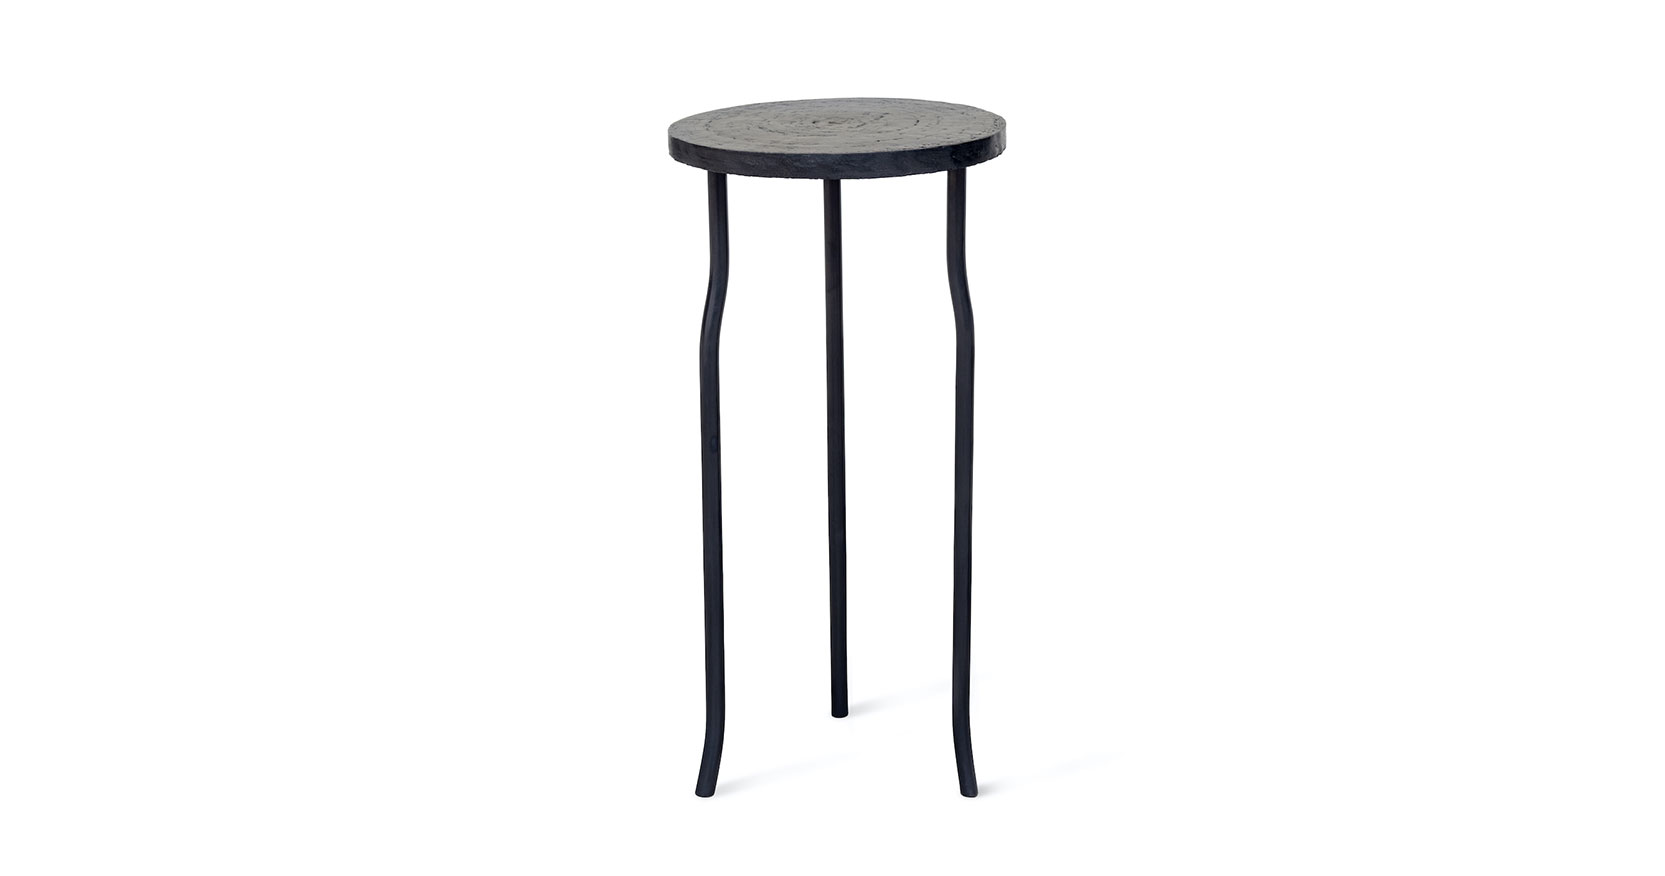 Eric Jourdan, small round minimalist table, with 3 high curved legs in black bronze and a black ceramic top